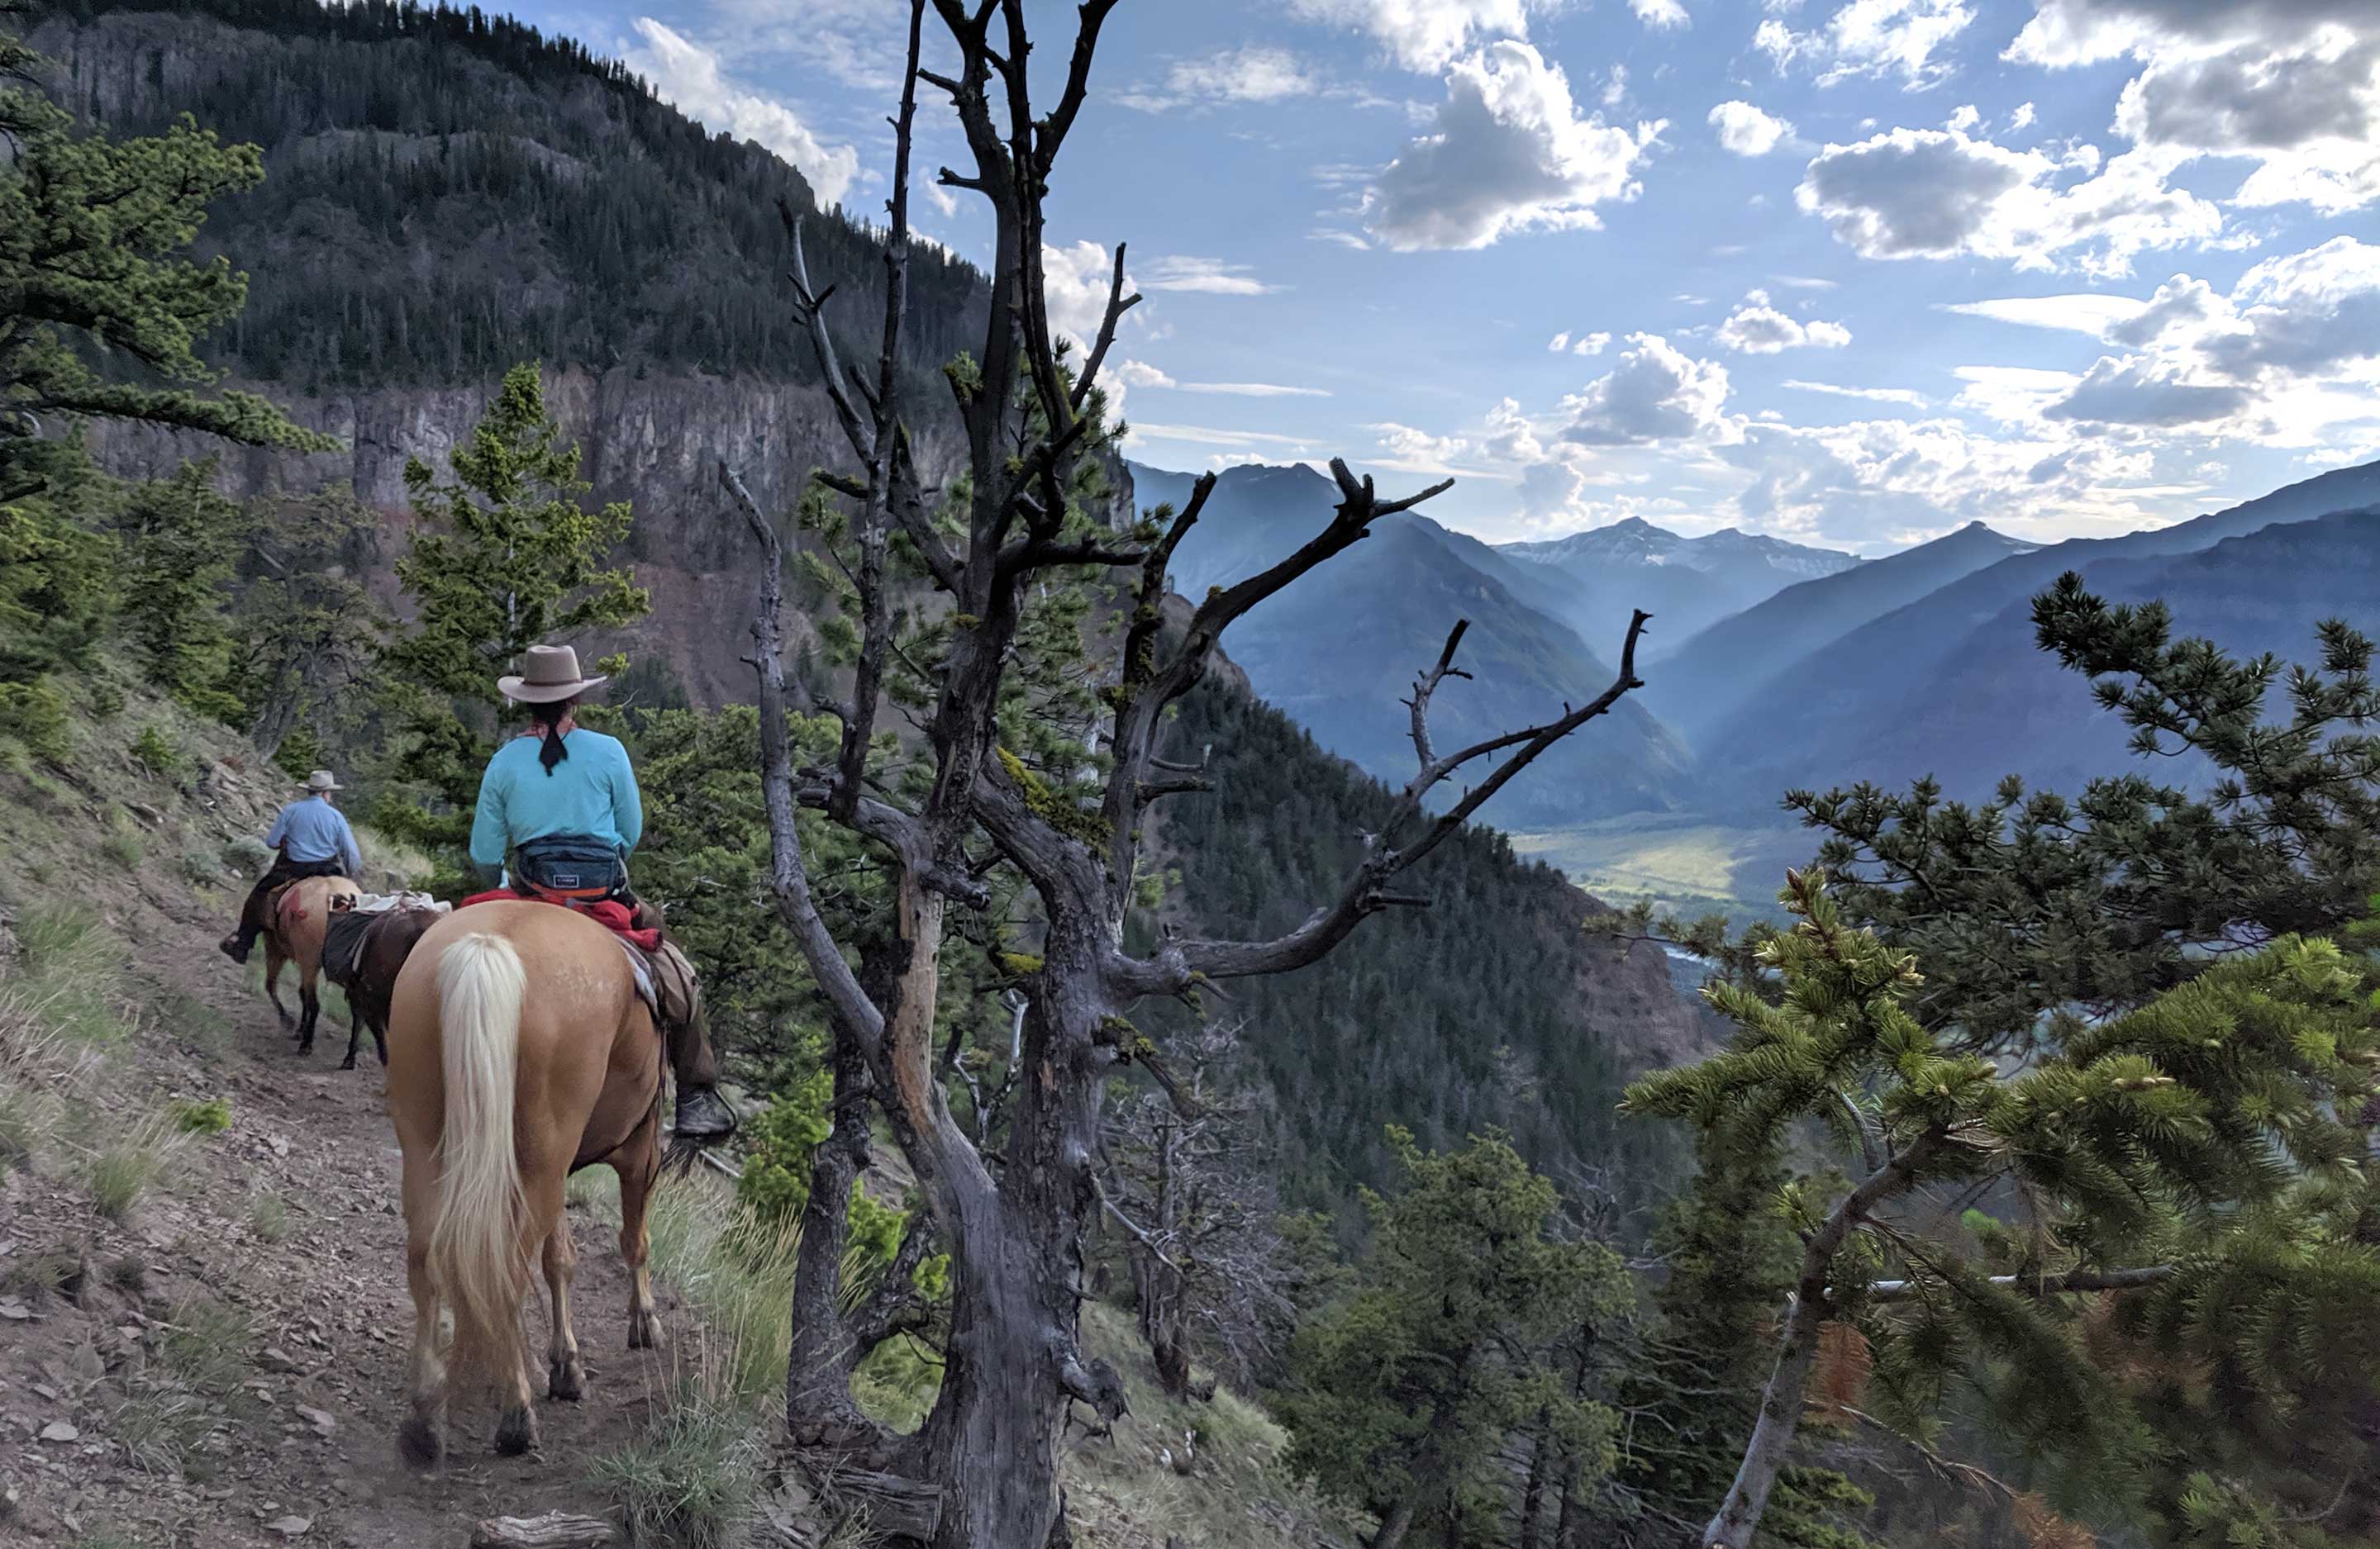 People riding horses in the mountains